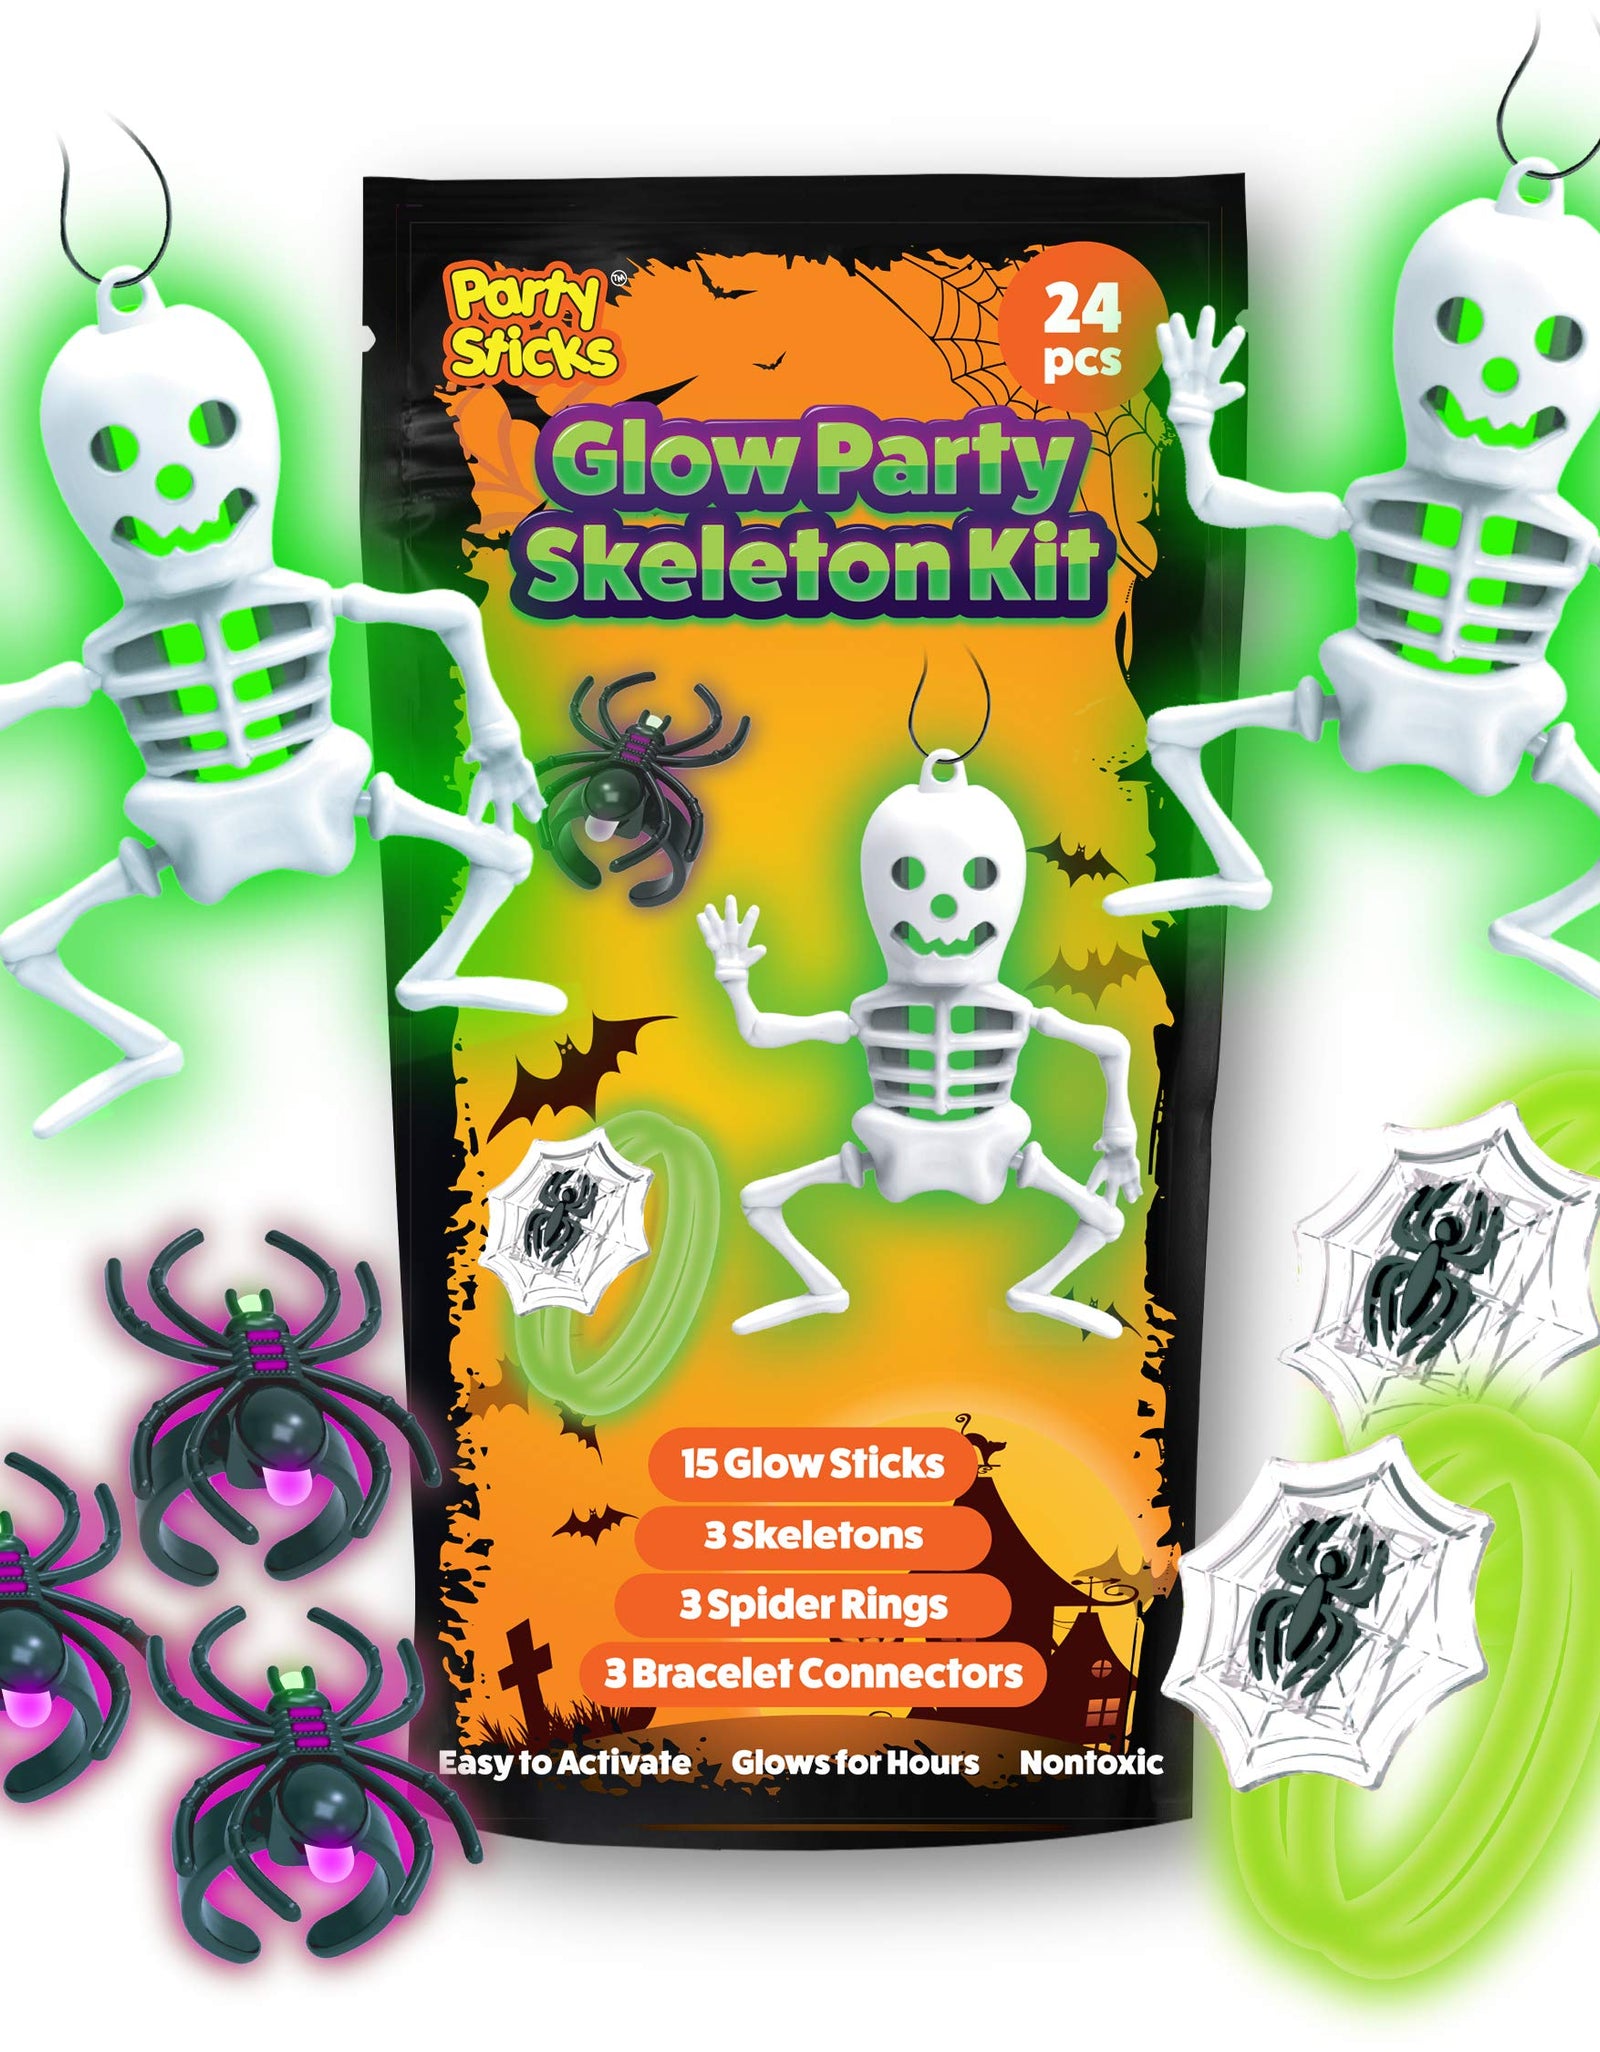 PartySticks Glow Party Skeleton Kit Party Favors for Kids - 24pk Glow in The Dark Party Decorations with 15 Glow Sticks, 3 Skeletons, 3 Spider Rings, and 3 Glow Bracelet Connectors